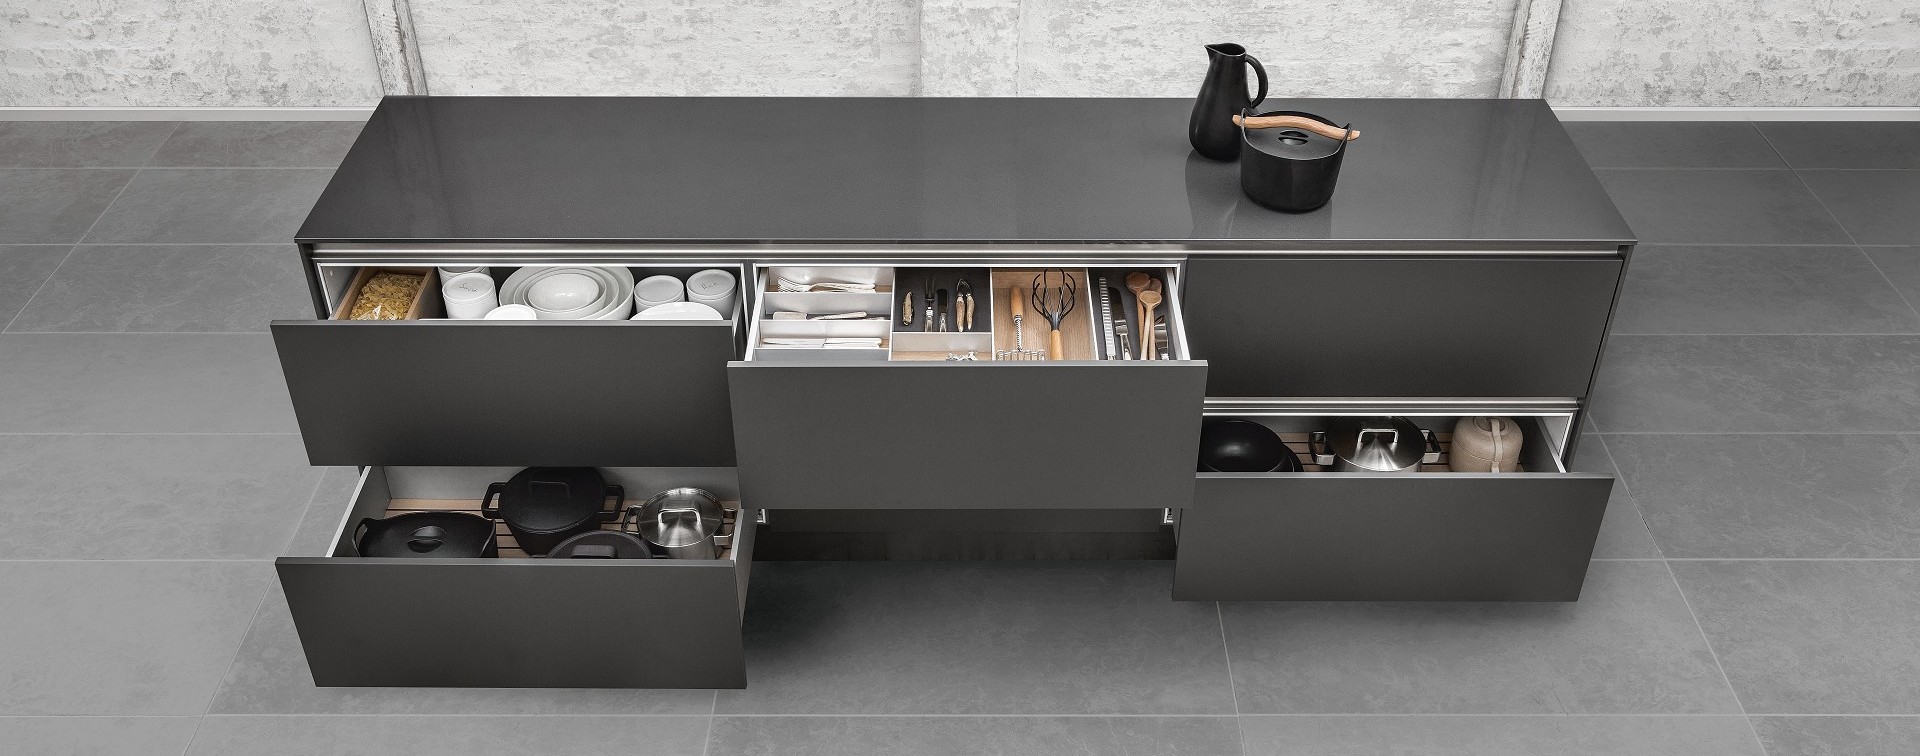 Versatile variations of kitchen accessories are available from SieMatic,